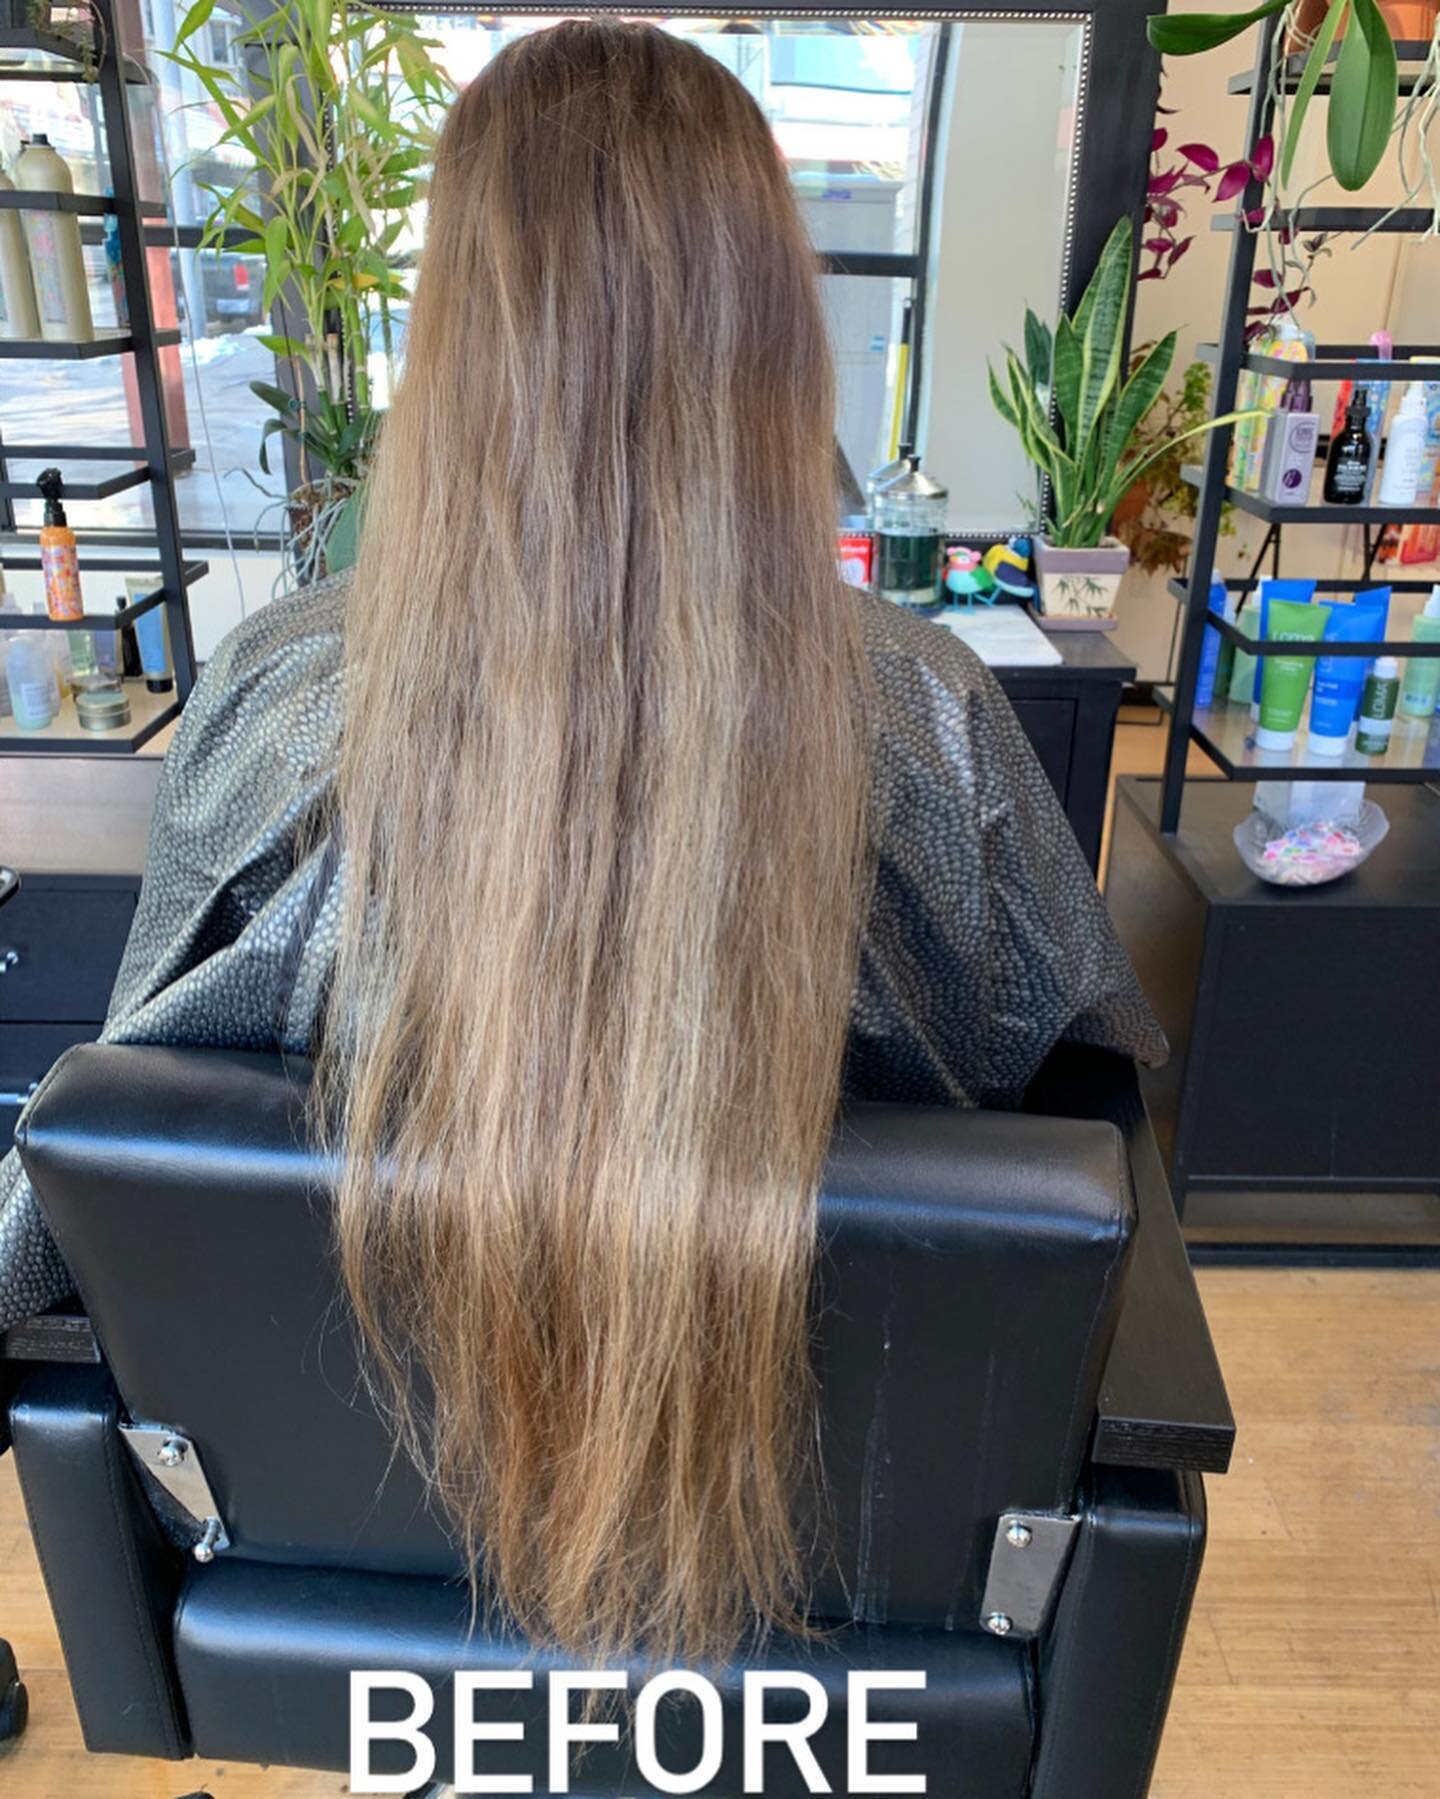 🤩Wow! 🤩This beautiful hair was transformed by Ashley- cutting off over a foot, and blonding- 💎This Gem deserved some pampering with a lil one at home, it can be hard to find the time! Self care is magic🌟💜Also, Ashley is a Hair Genius- message he